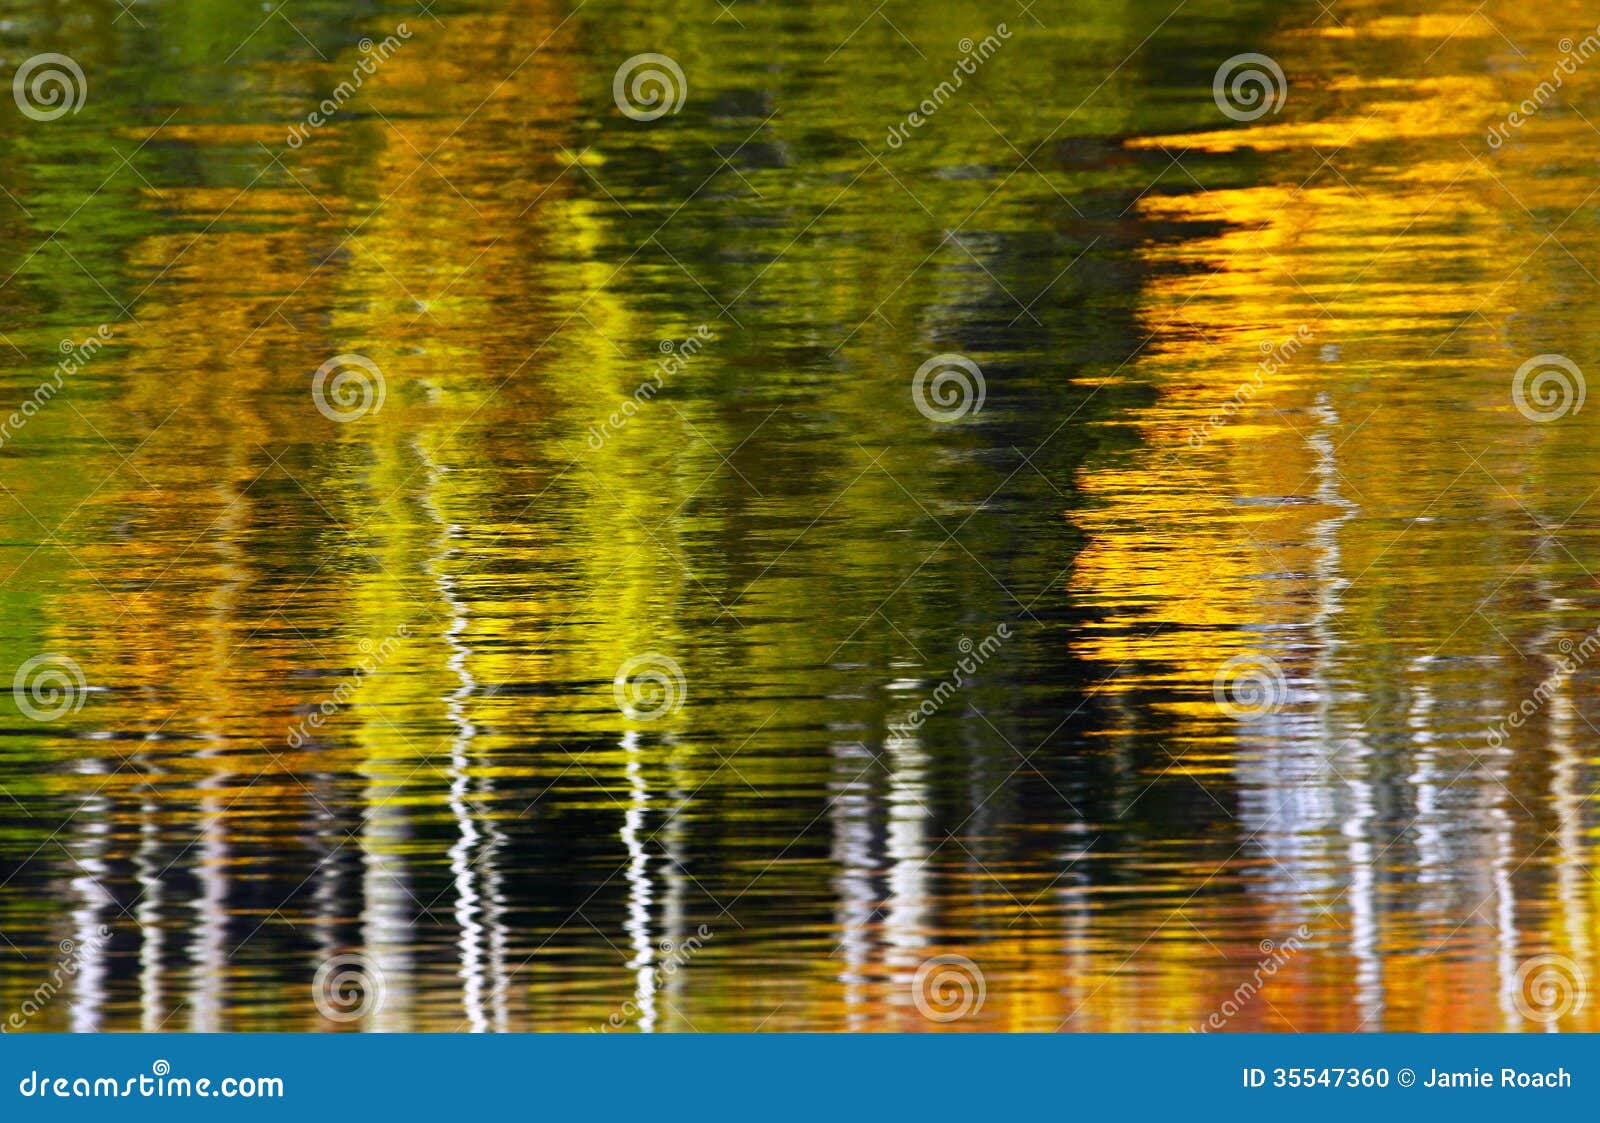 Abstract Trees Water Reflection Stock Photo Image 35547360